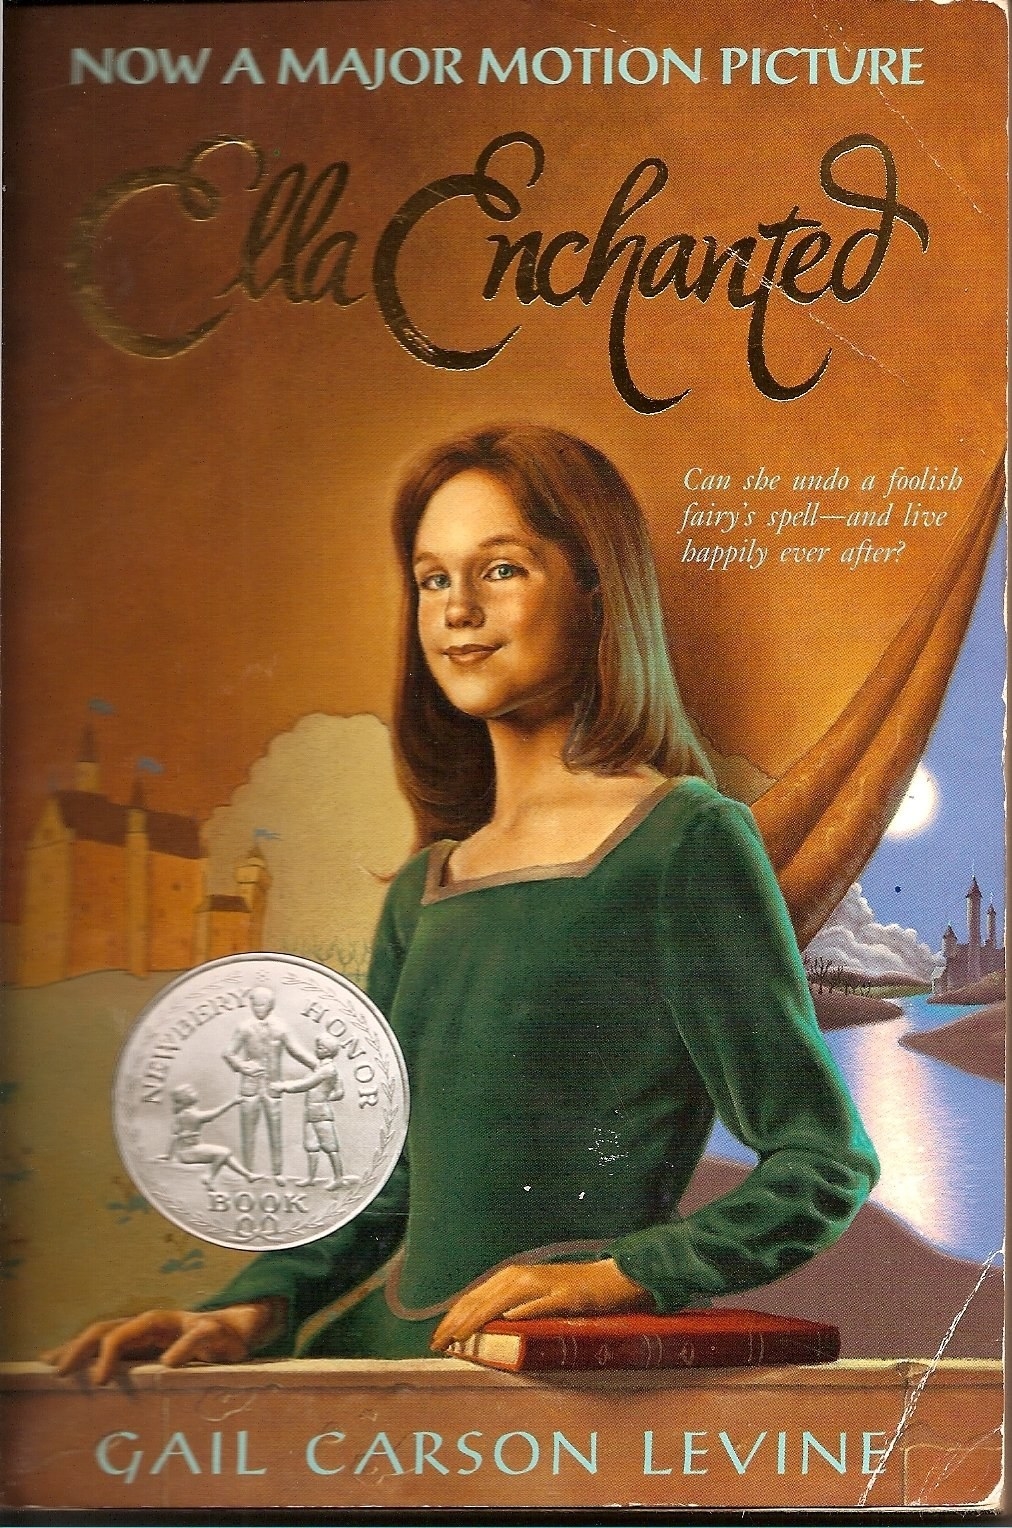 The cover of &quot;Ella Enchanted&quot; by Gail Carson Levine